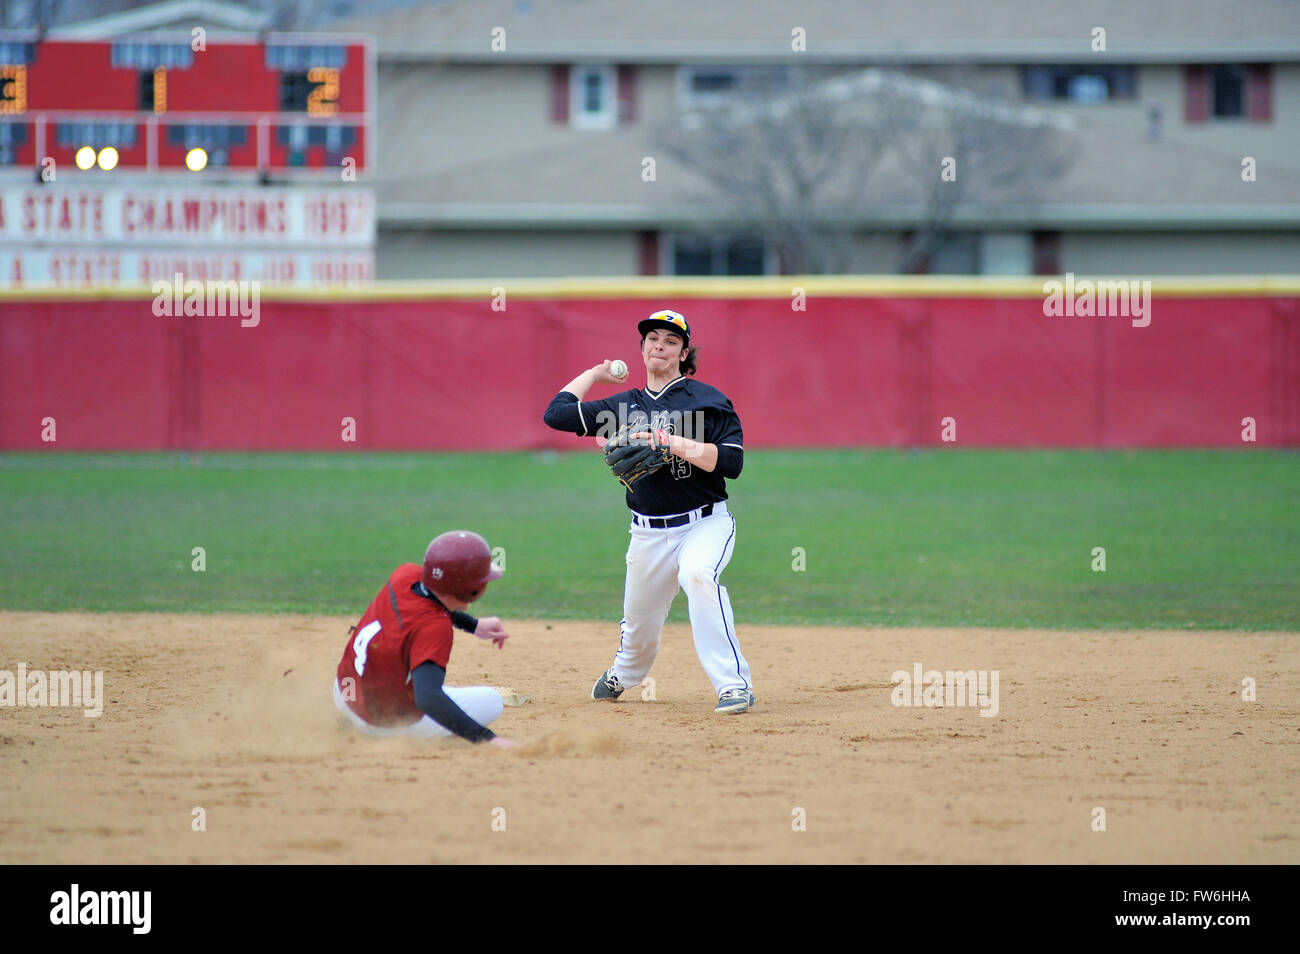 High school second baseman backs off the second base bag after retiring a sliding runner prior to throwing onto first base. USA. Stock Photo